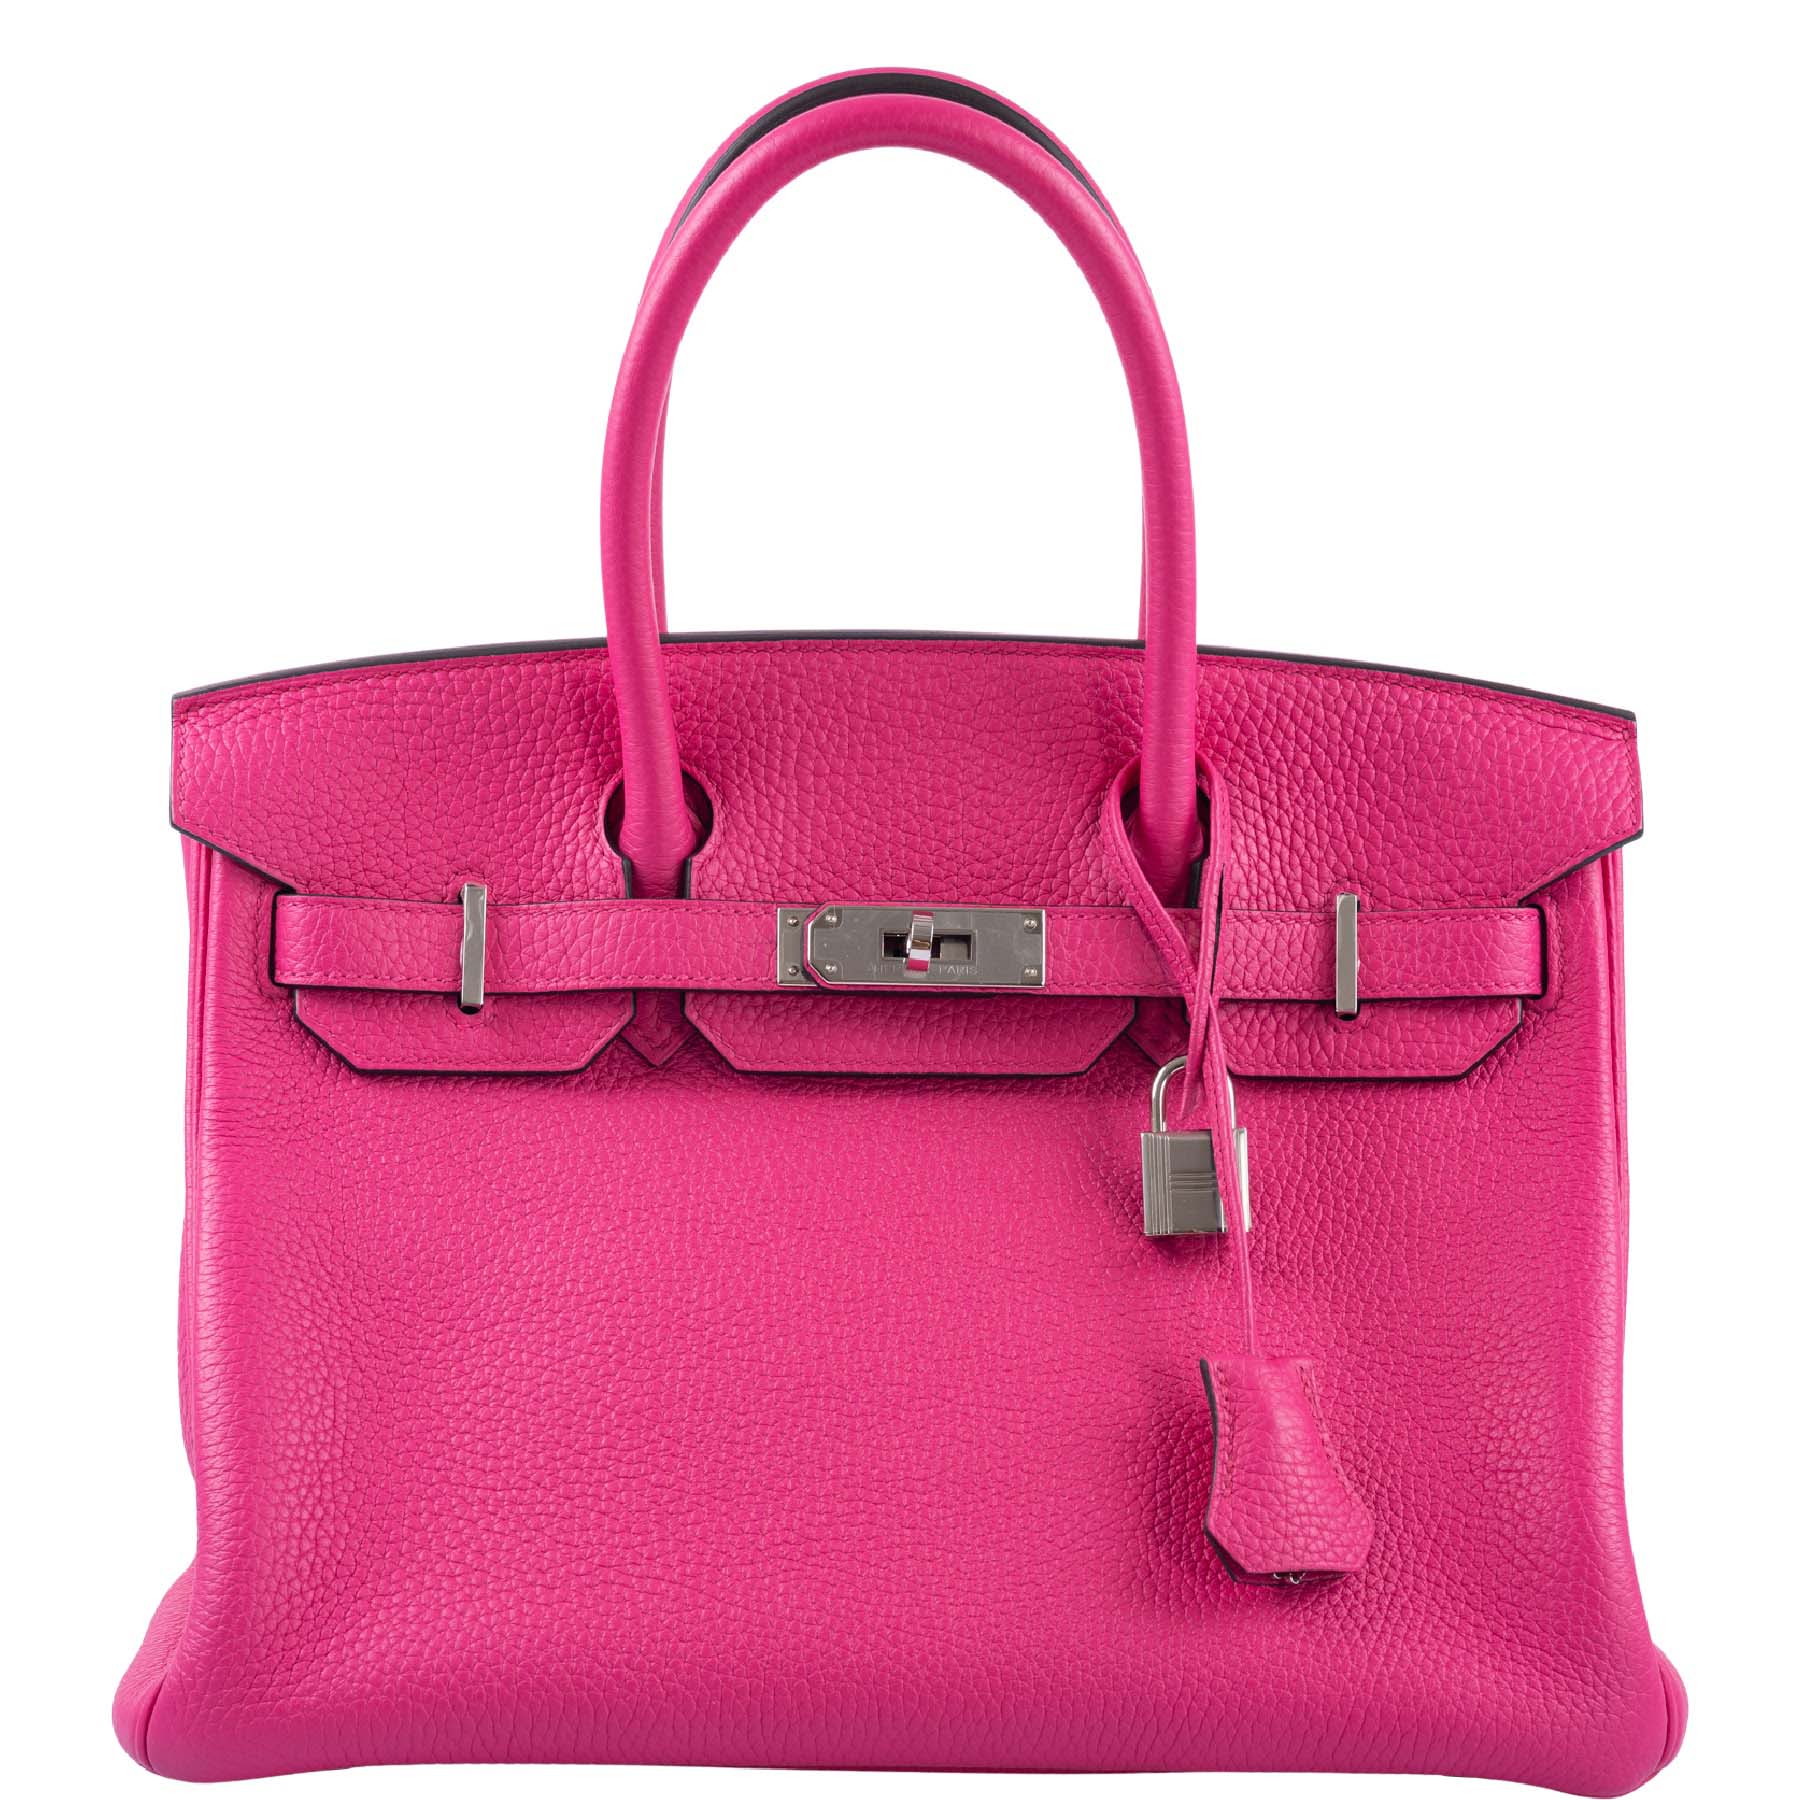 THE REAL HOUSEWIVES OF HERMÈS - THE BIRKIN FAIRY